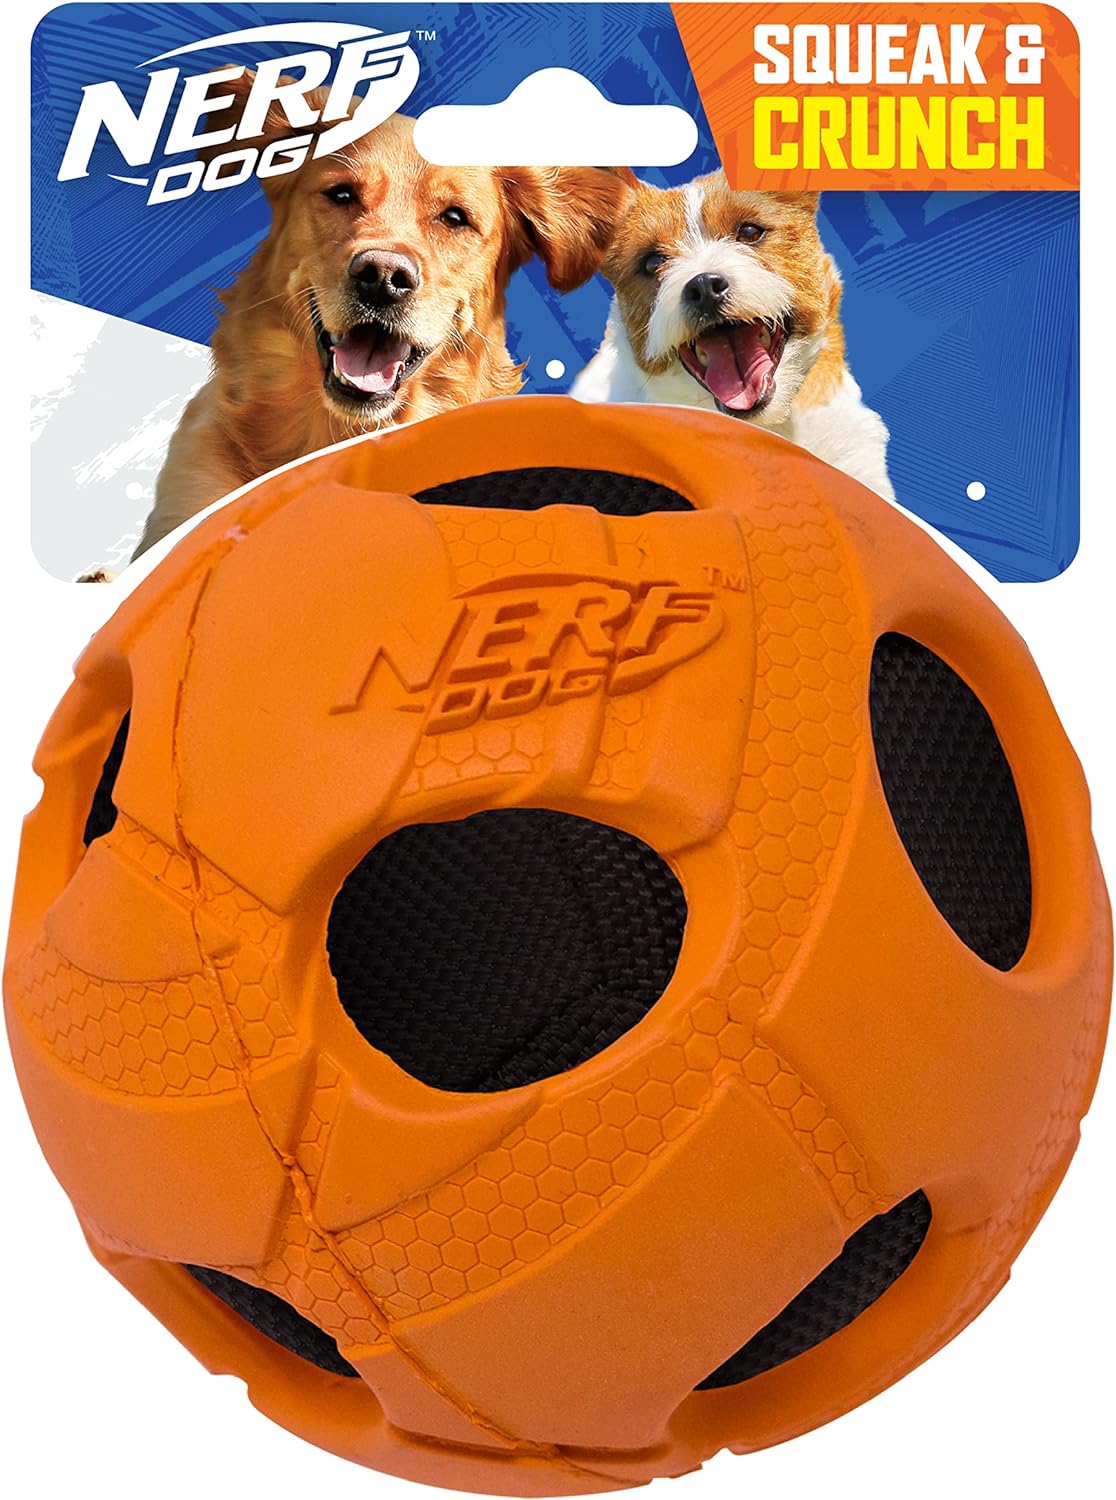 My dog loves the ball, it' all a matter of preference. He loves that it' chewy and rubber I don't know what it is but it' the only bully really loves. After a while I had to pull the inside of it out but it' durable it' strong, it' safe it doesn't break off in their mouth and the only reason I'm ordering another one is because I'm afraid I'll lose the old one! I hope your dog or has the same experience as mine. Highly recommend